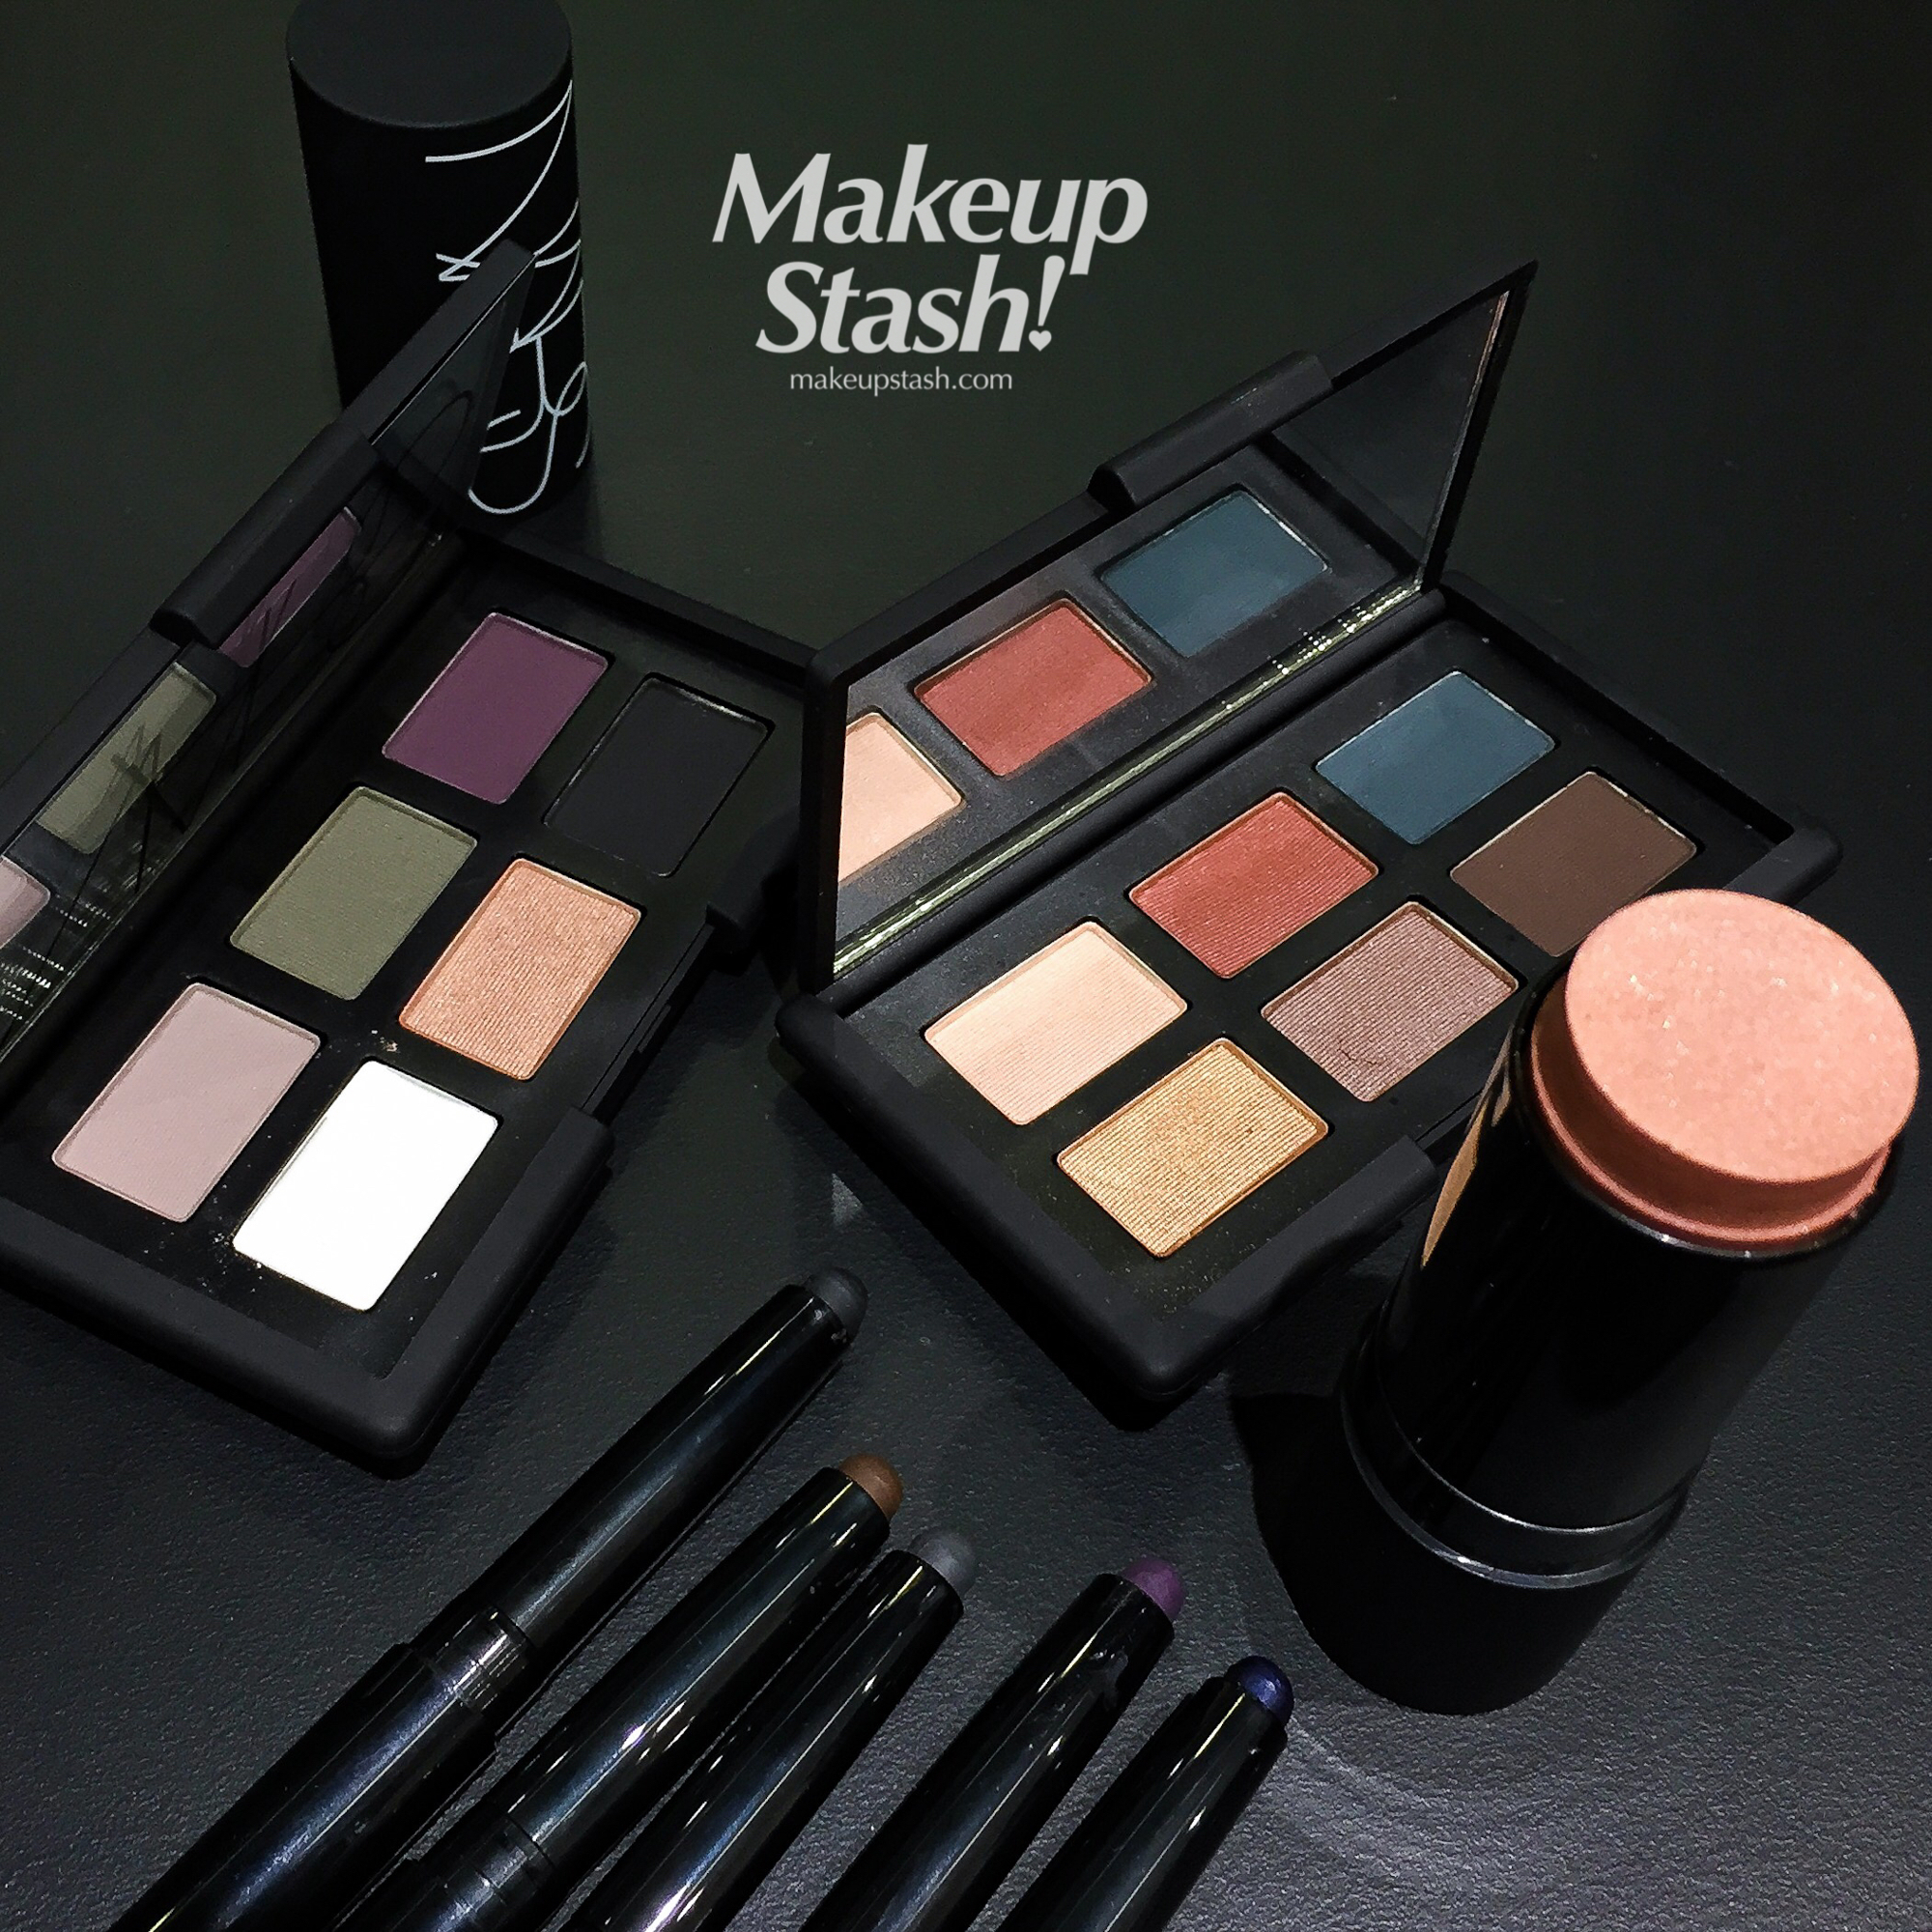 NARS Eye-Opening Act Collection for Spring 2015